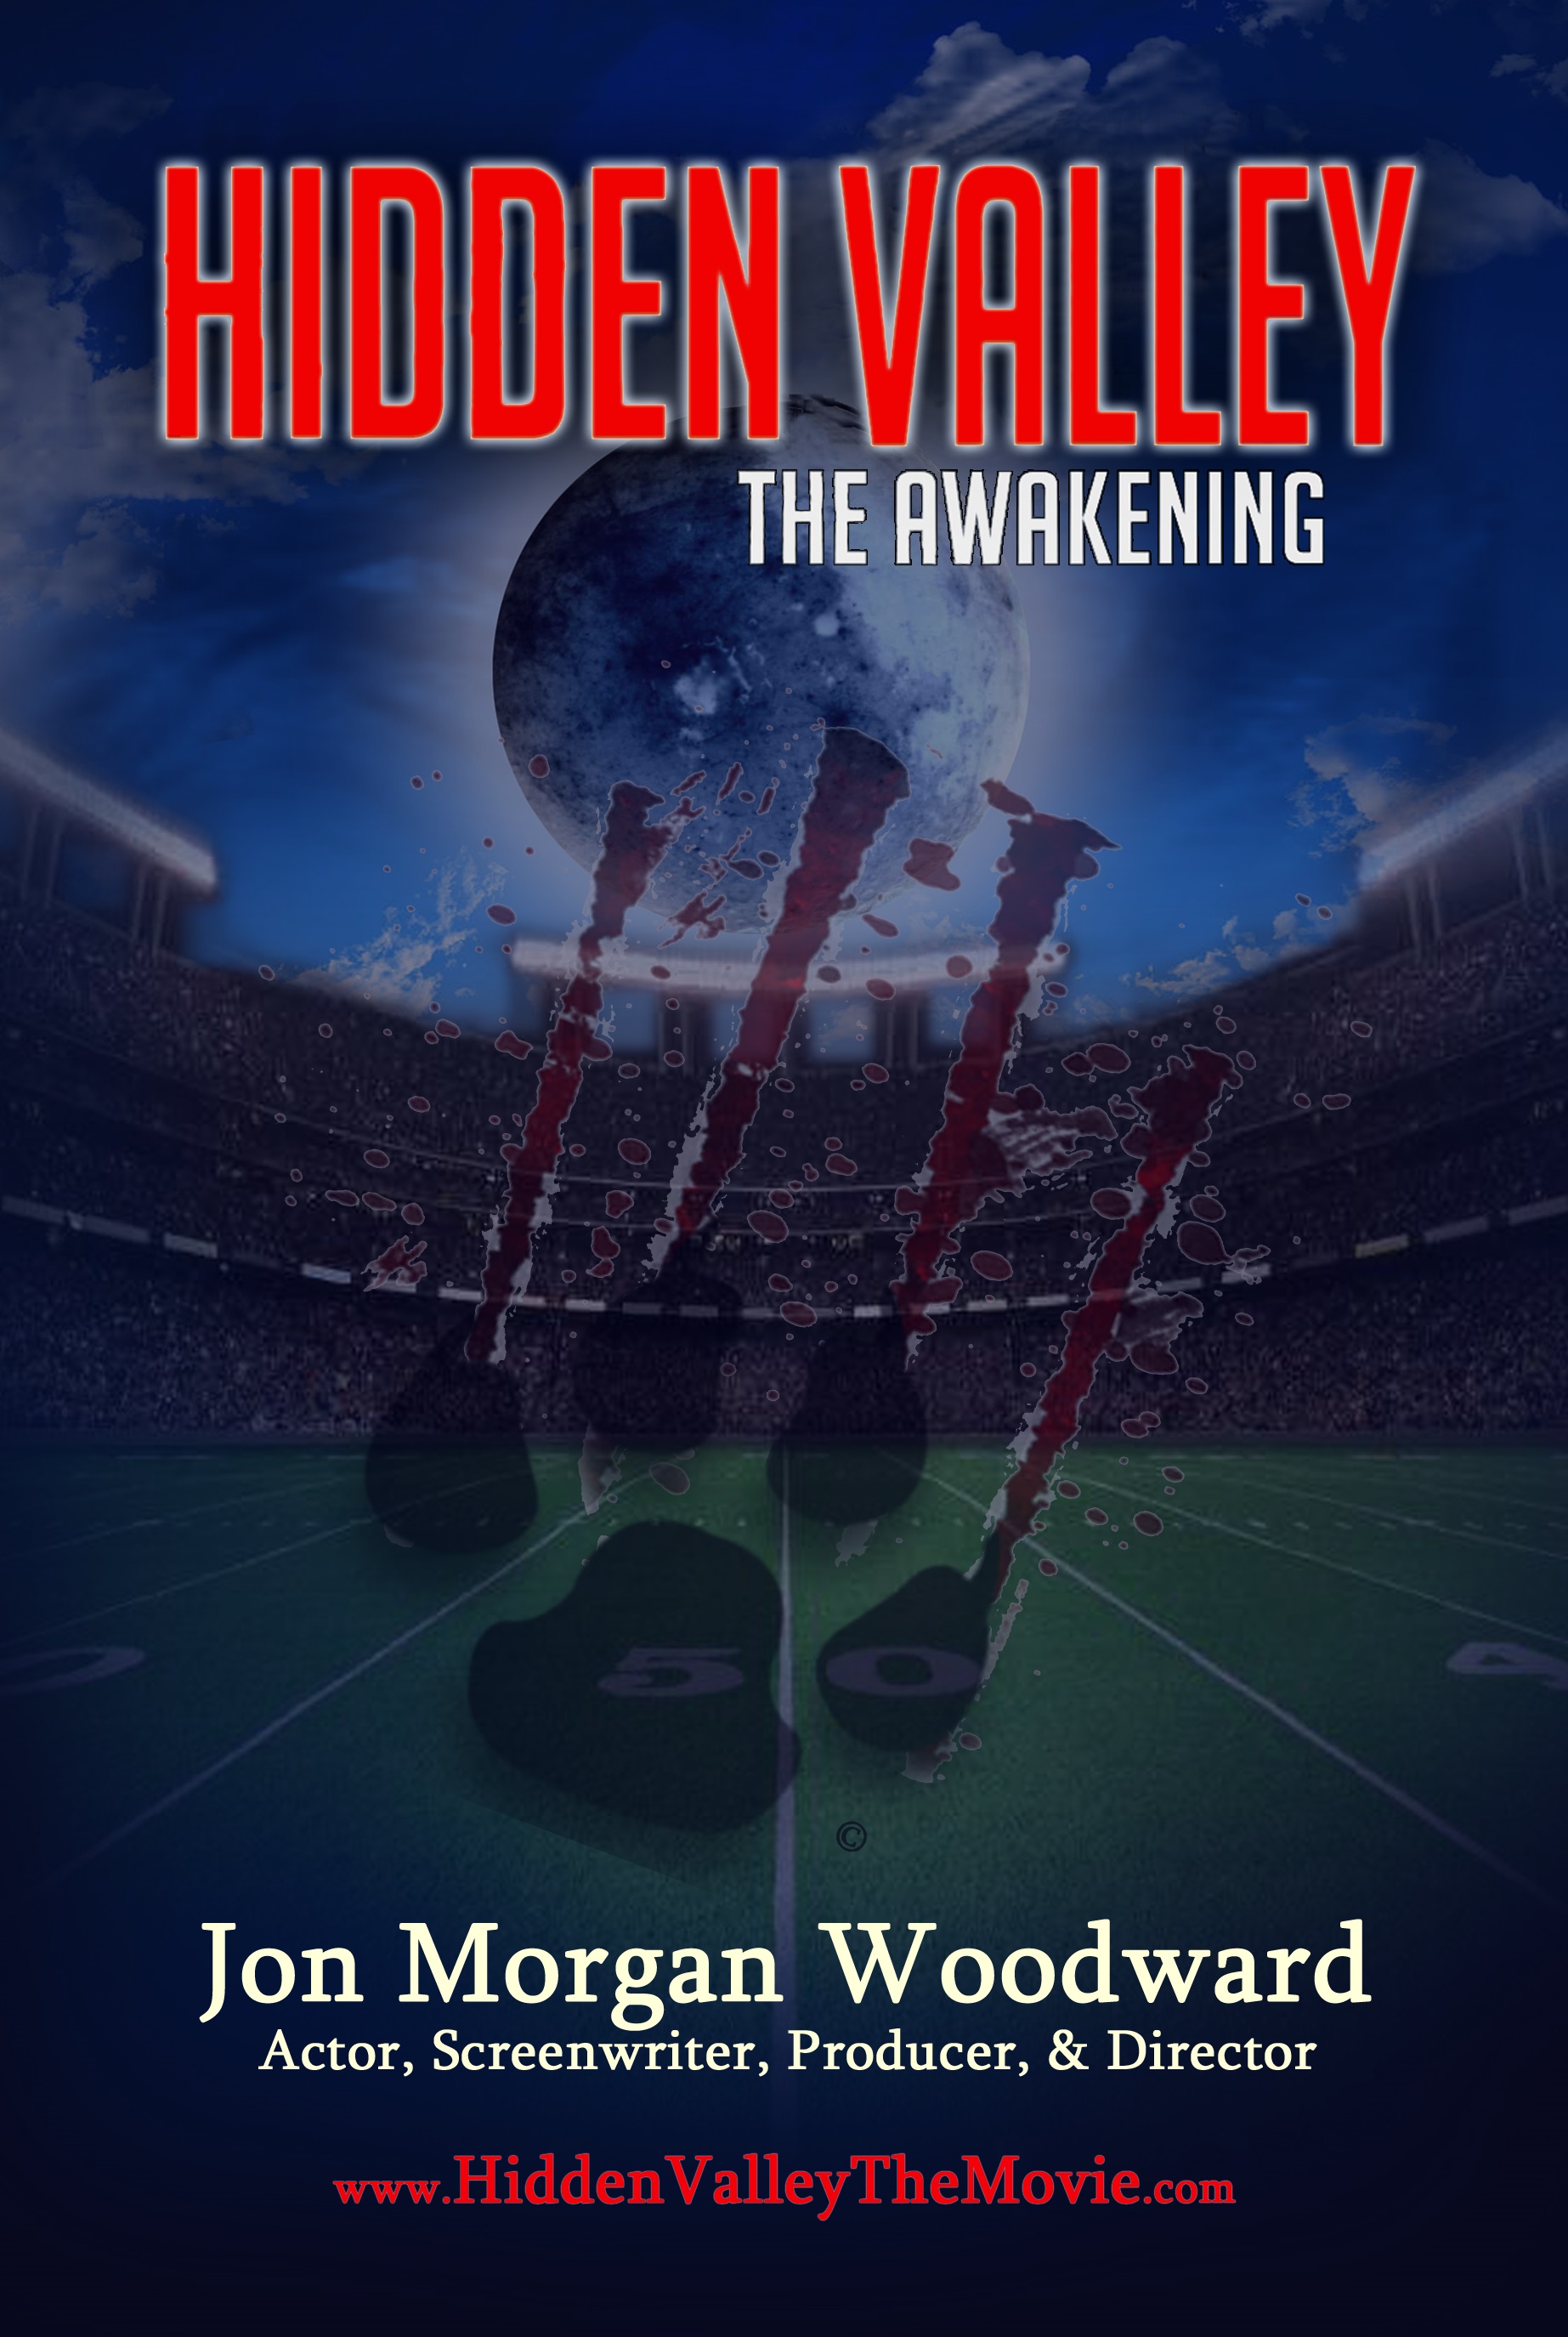 Hidden Valley: The Awakening;  Author Jon Morgan Woodward; Publisher The RED Carpet Connection